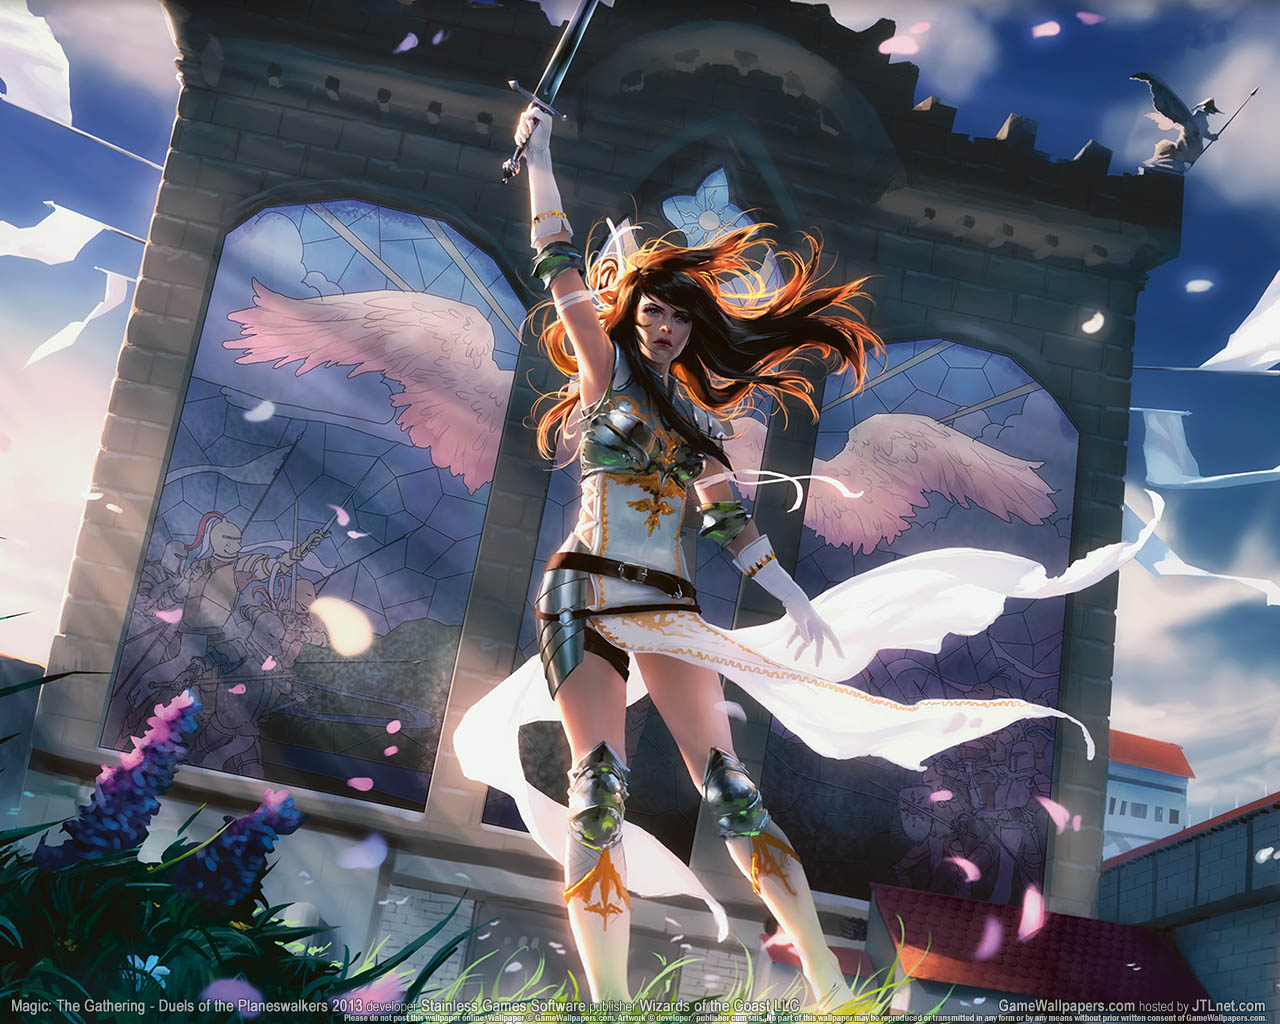 Magic%3A The Gathering - Duels of the Planeswalkers 2013 Hintergrundbild 01 1280x1024